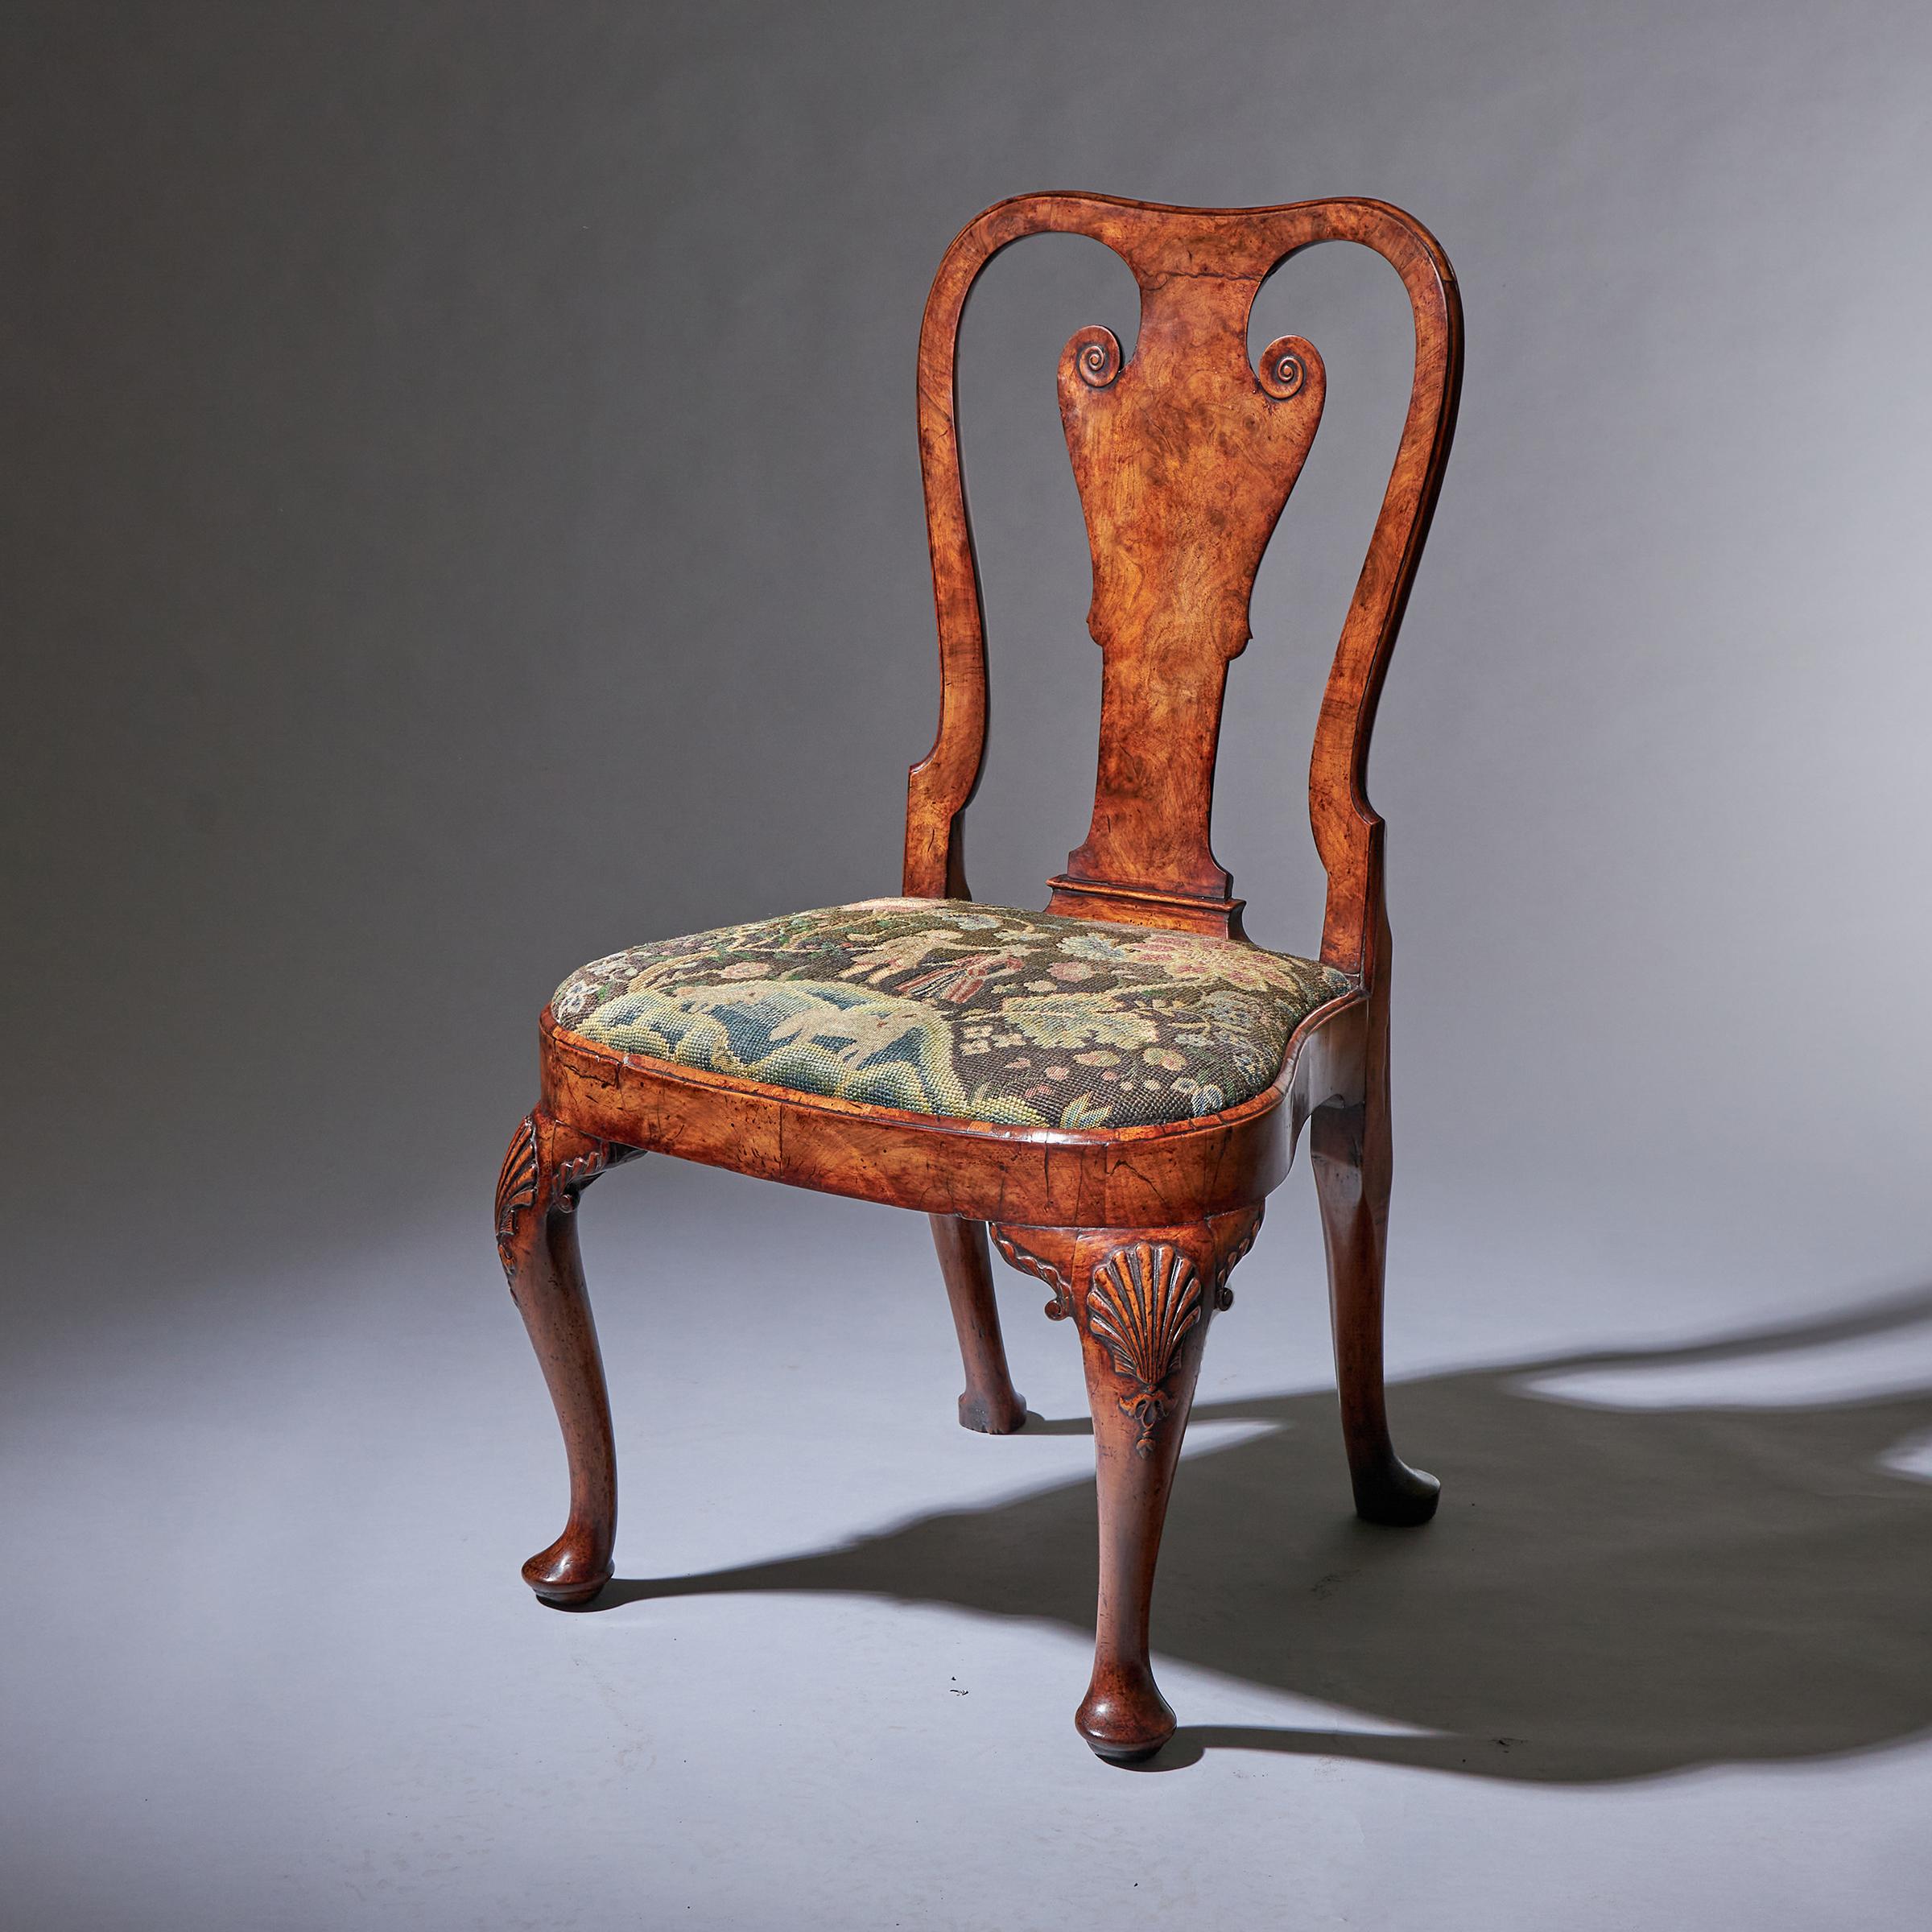 English 18th Century George I Carved Walnut Chair Covered in Period Needlework